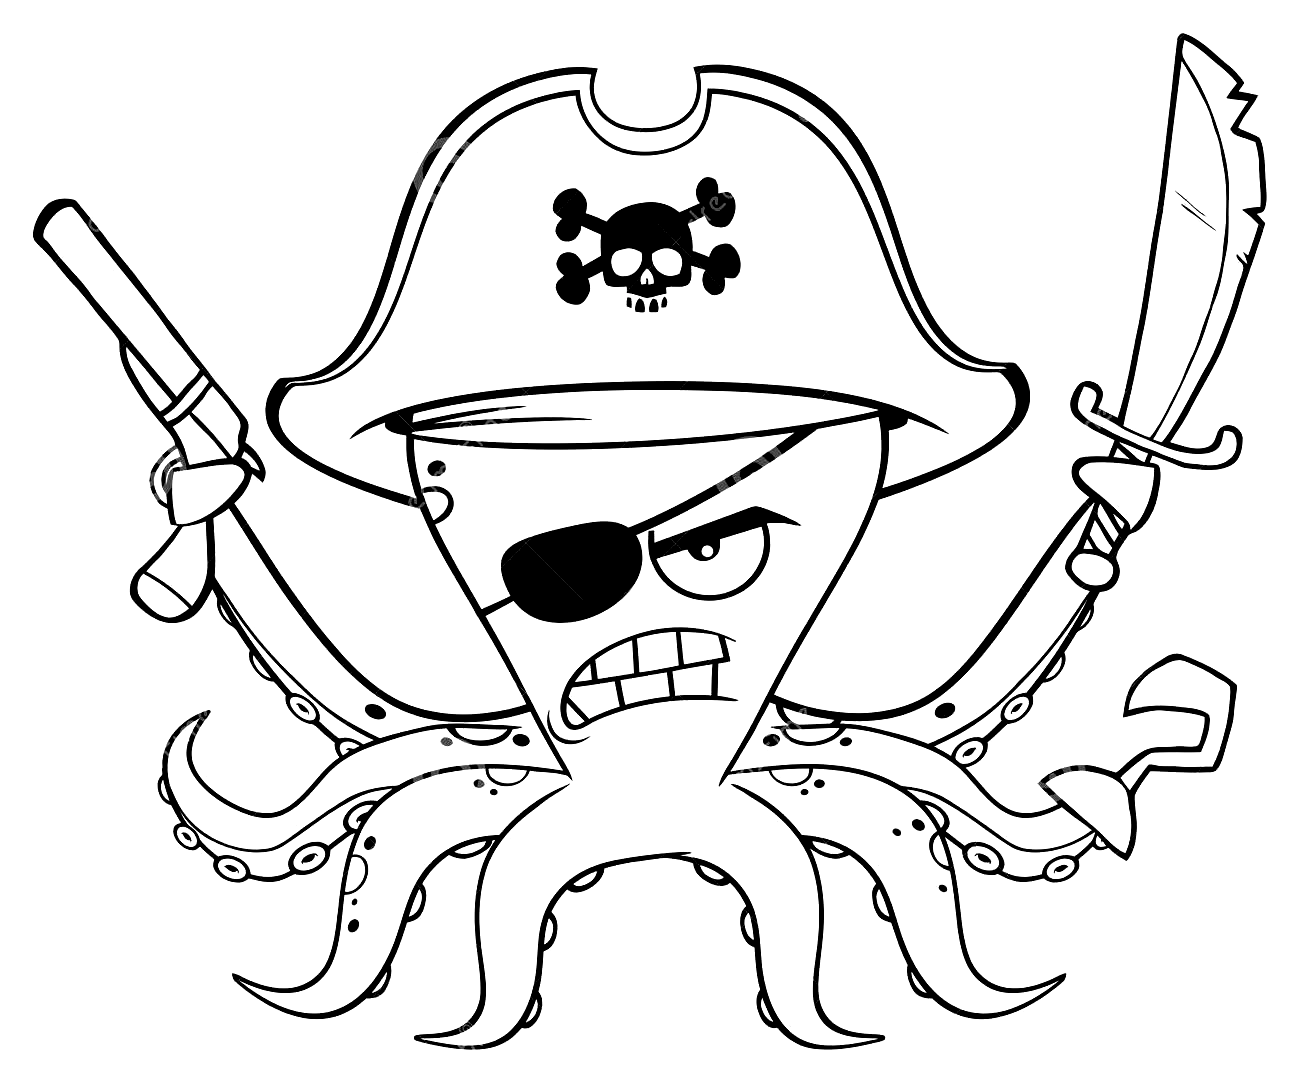 Angry Pirate Octopus Coloring Page. 